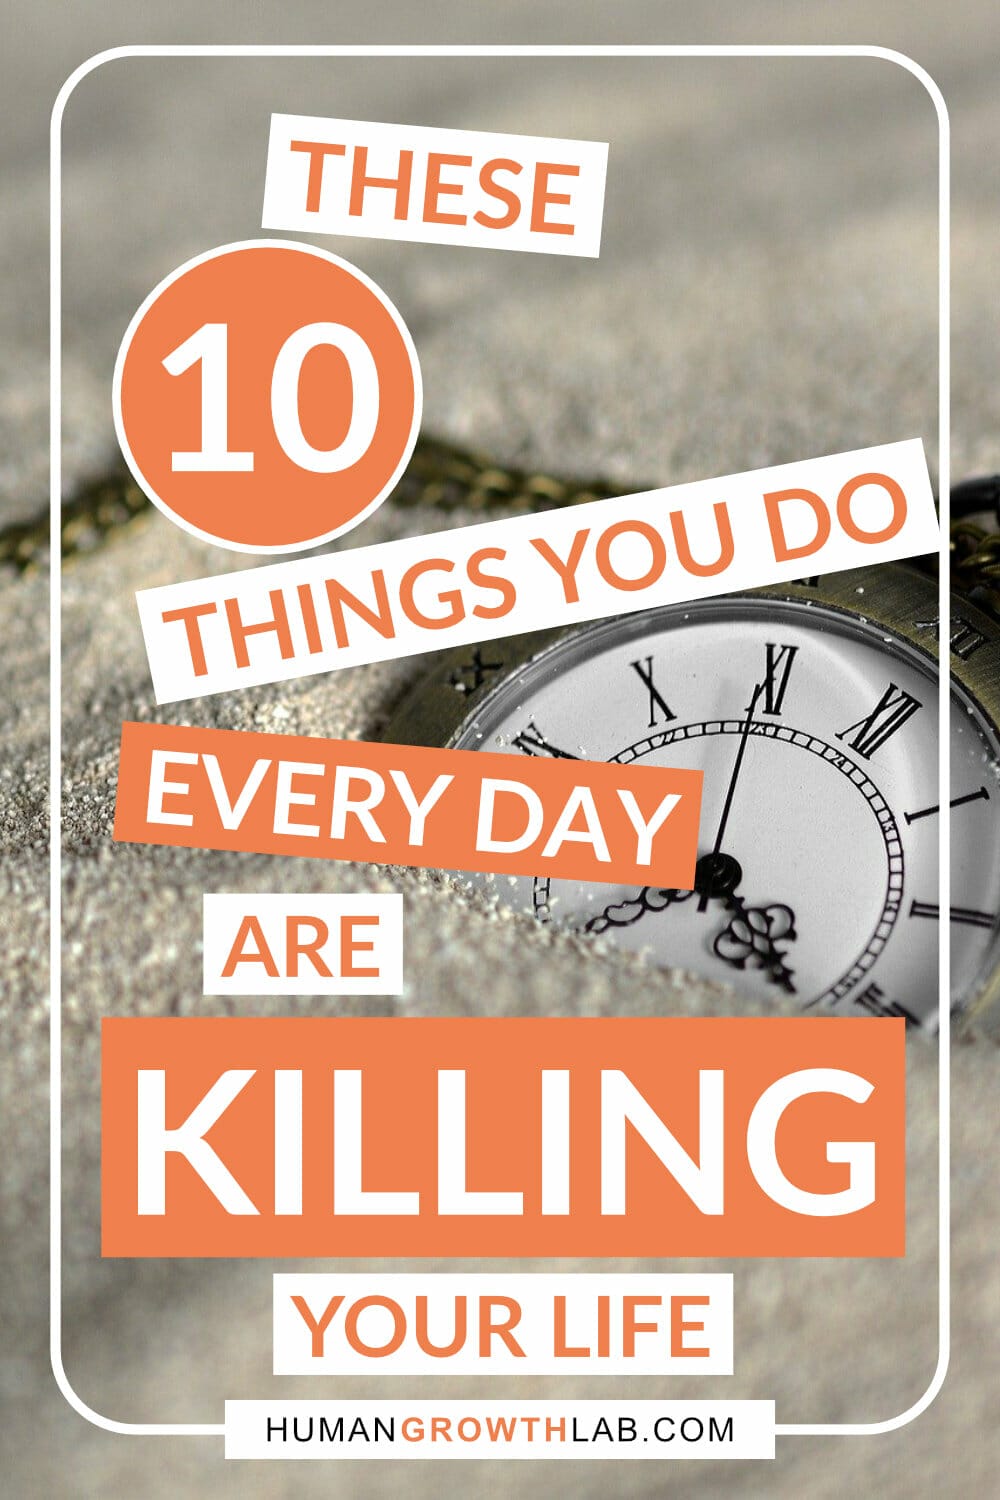 You are KILLING your life EVERY SINGLE DAY with these 10 things that you do. Learn what they are, so that you can stop them NOW and instantly live a happier and more enjoyable life. #happylife #lifetips via @humangrowthlab